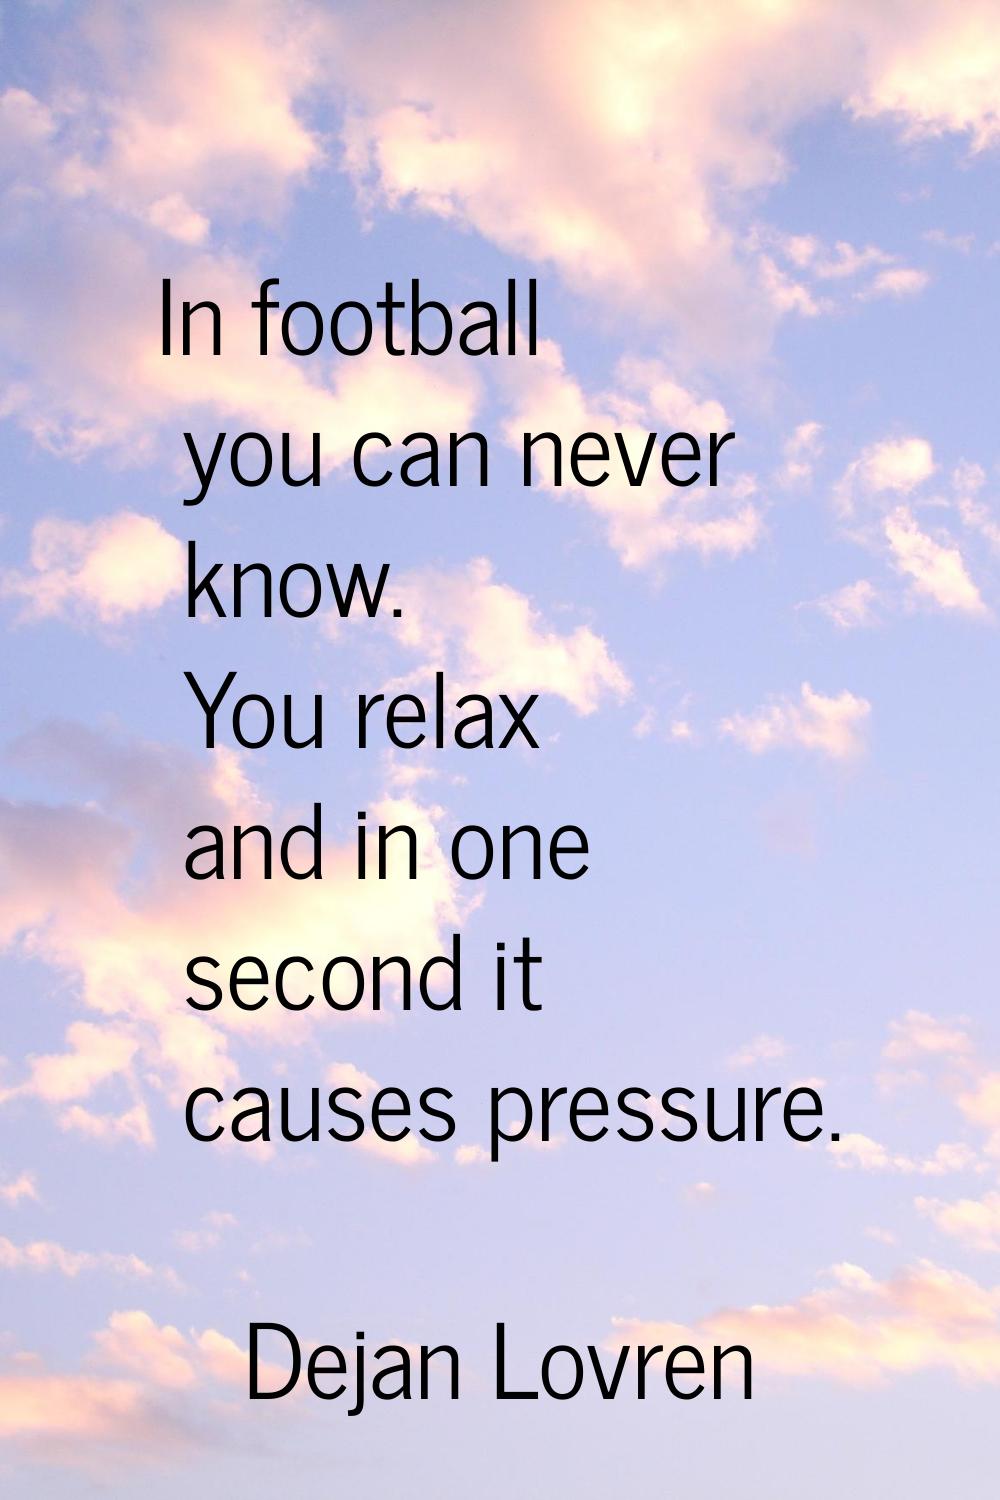 In football you can never know. You relax and in one second it causes pressure.